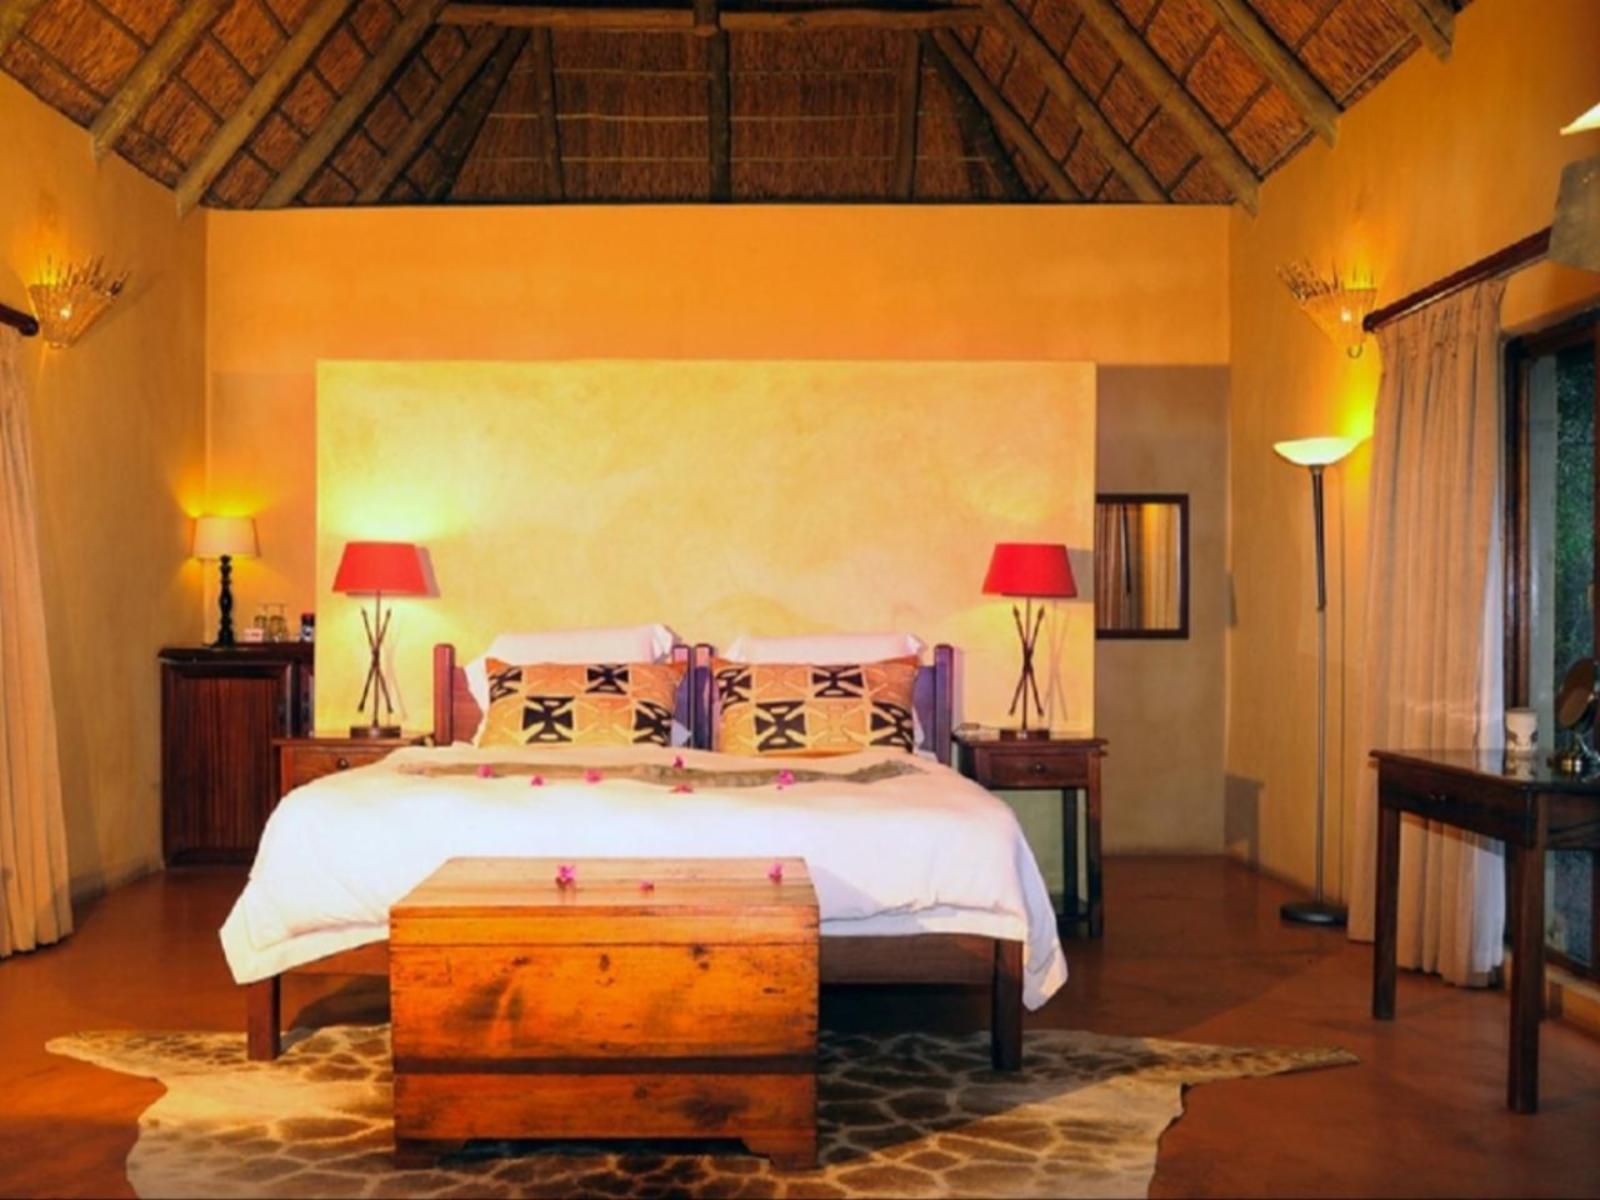 Iwamanzi Game Lodge Koster North West Province South Africa Colorful, Bedroom